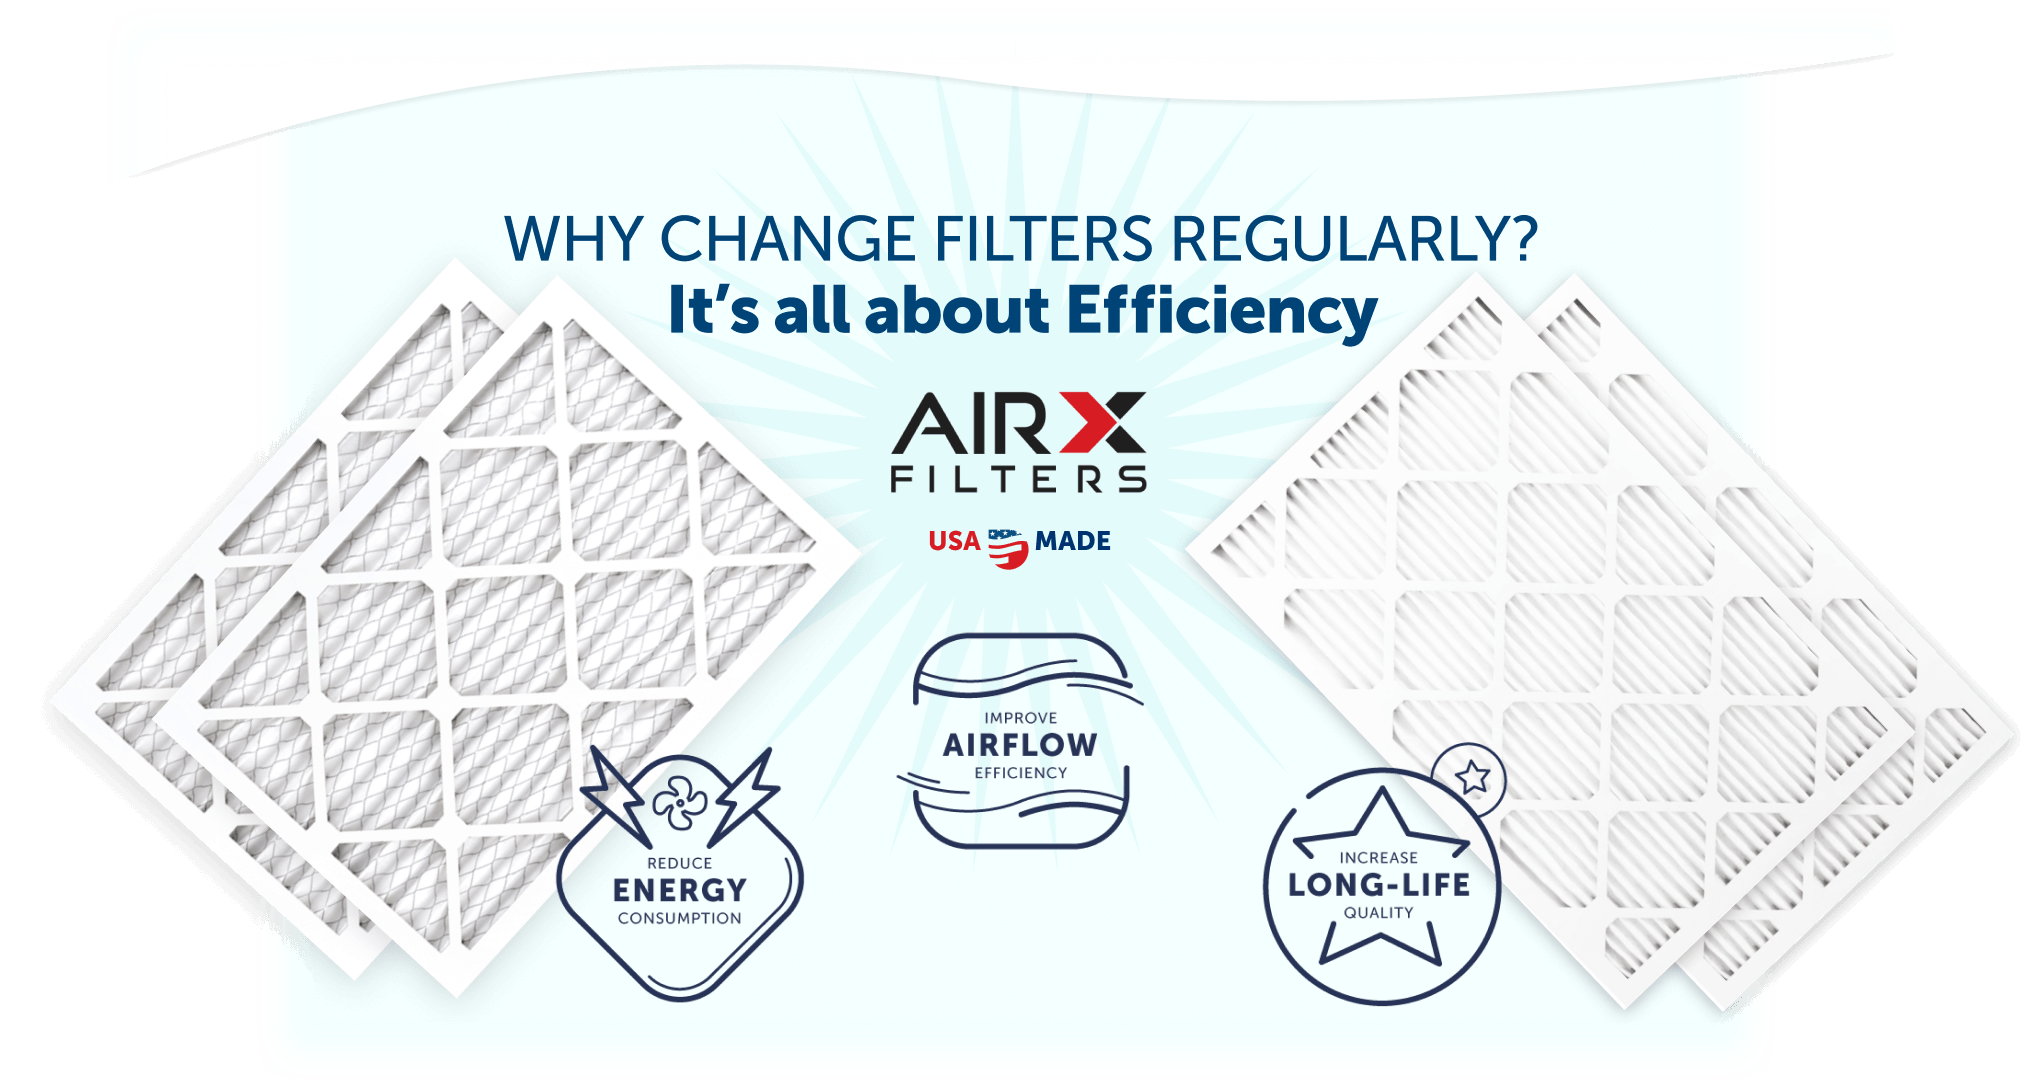 Why change filters regularly? It's all about efficiency.